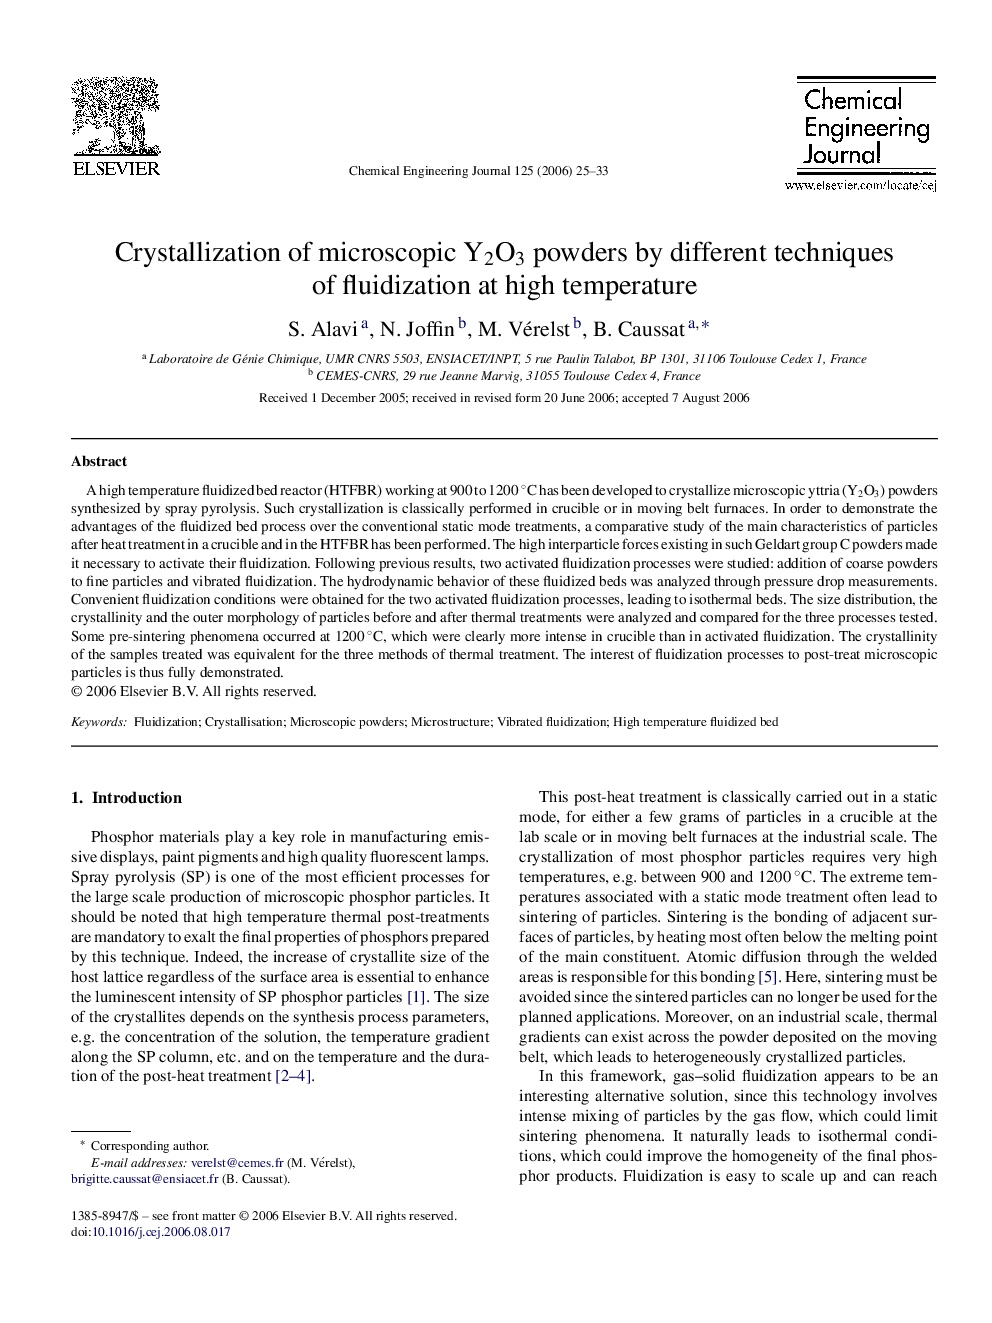 Crystallization of microscopic Y2O3 powders by different techniques of fluidization at high temperature